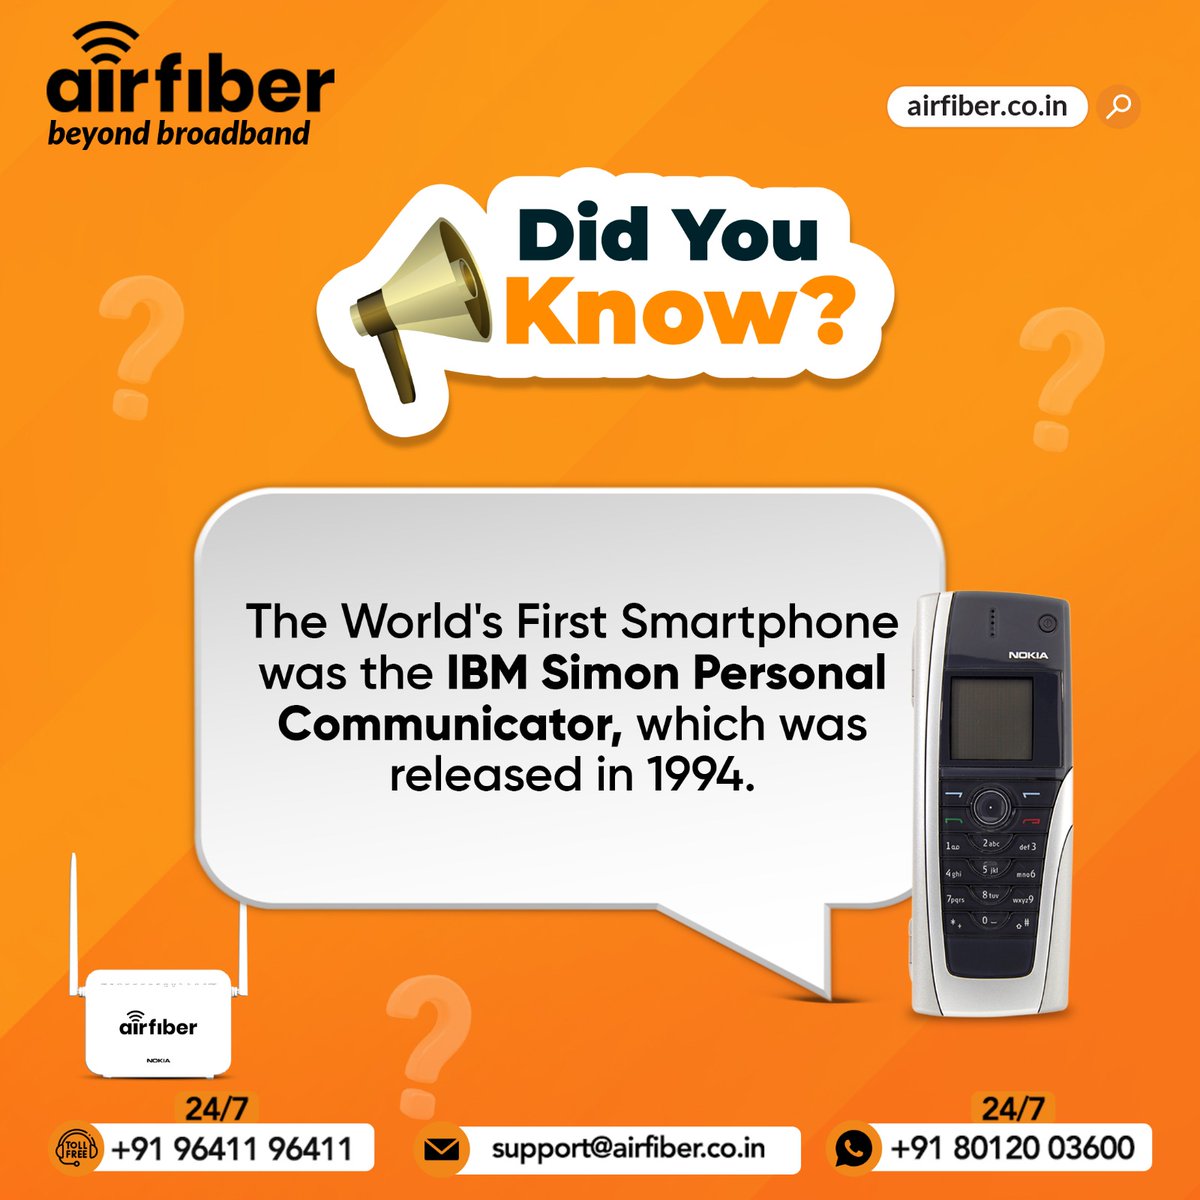 Fun fact AirFiber's cutting-edge technology is redefining the way we connect!!

Airfiber Broadband in Hosur !!

#Hosur | #InternetService | #FastInternetSpeed | #Airfiber | #smartservice | #24HoursSupport | #smartphone | #simon | #personalcommunication | #nokiamobile